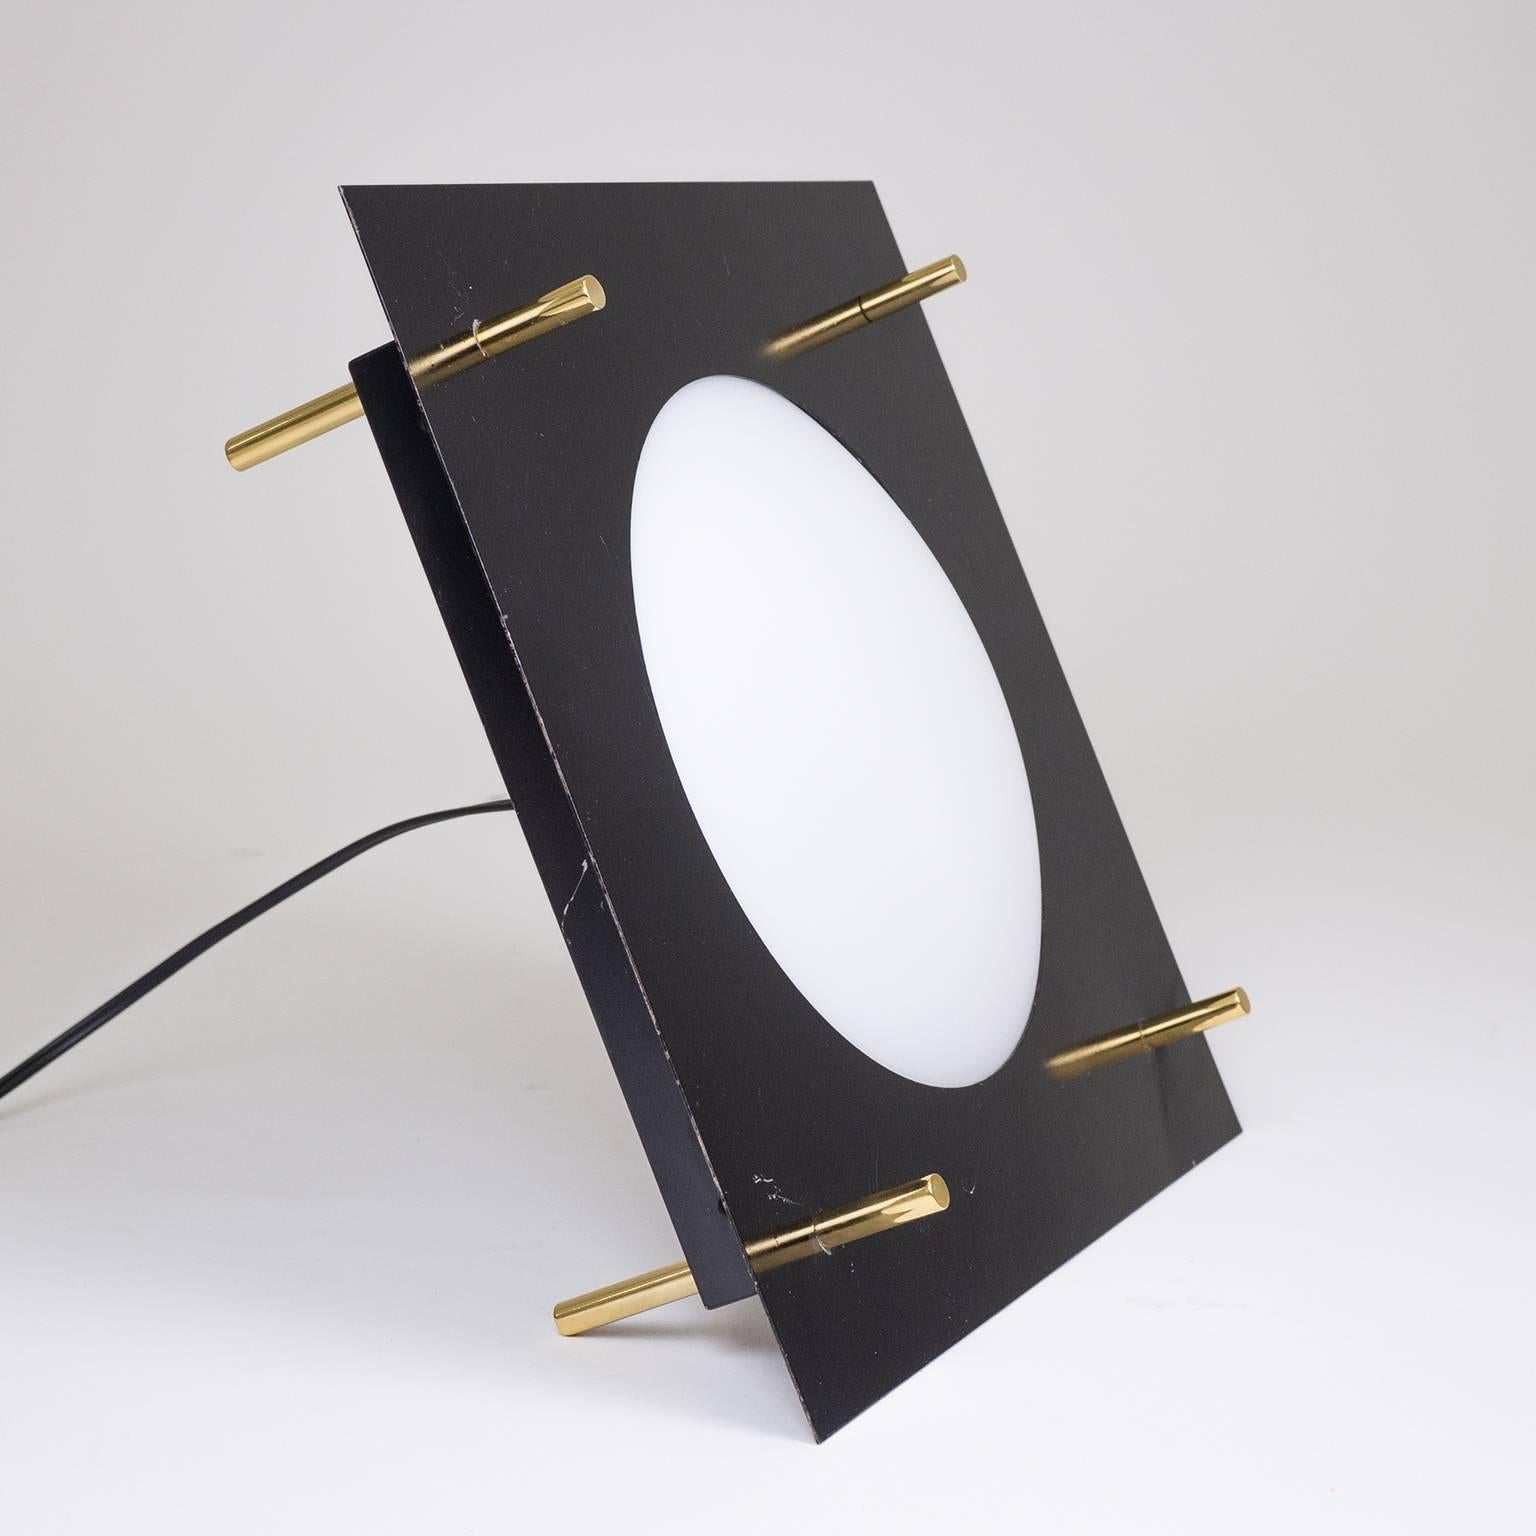 Modernist Table Lamp Attributed to Stilnovo, 1950s For Sale 4